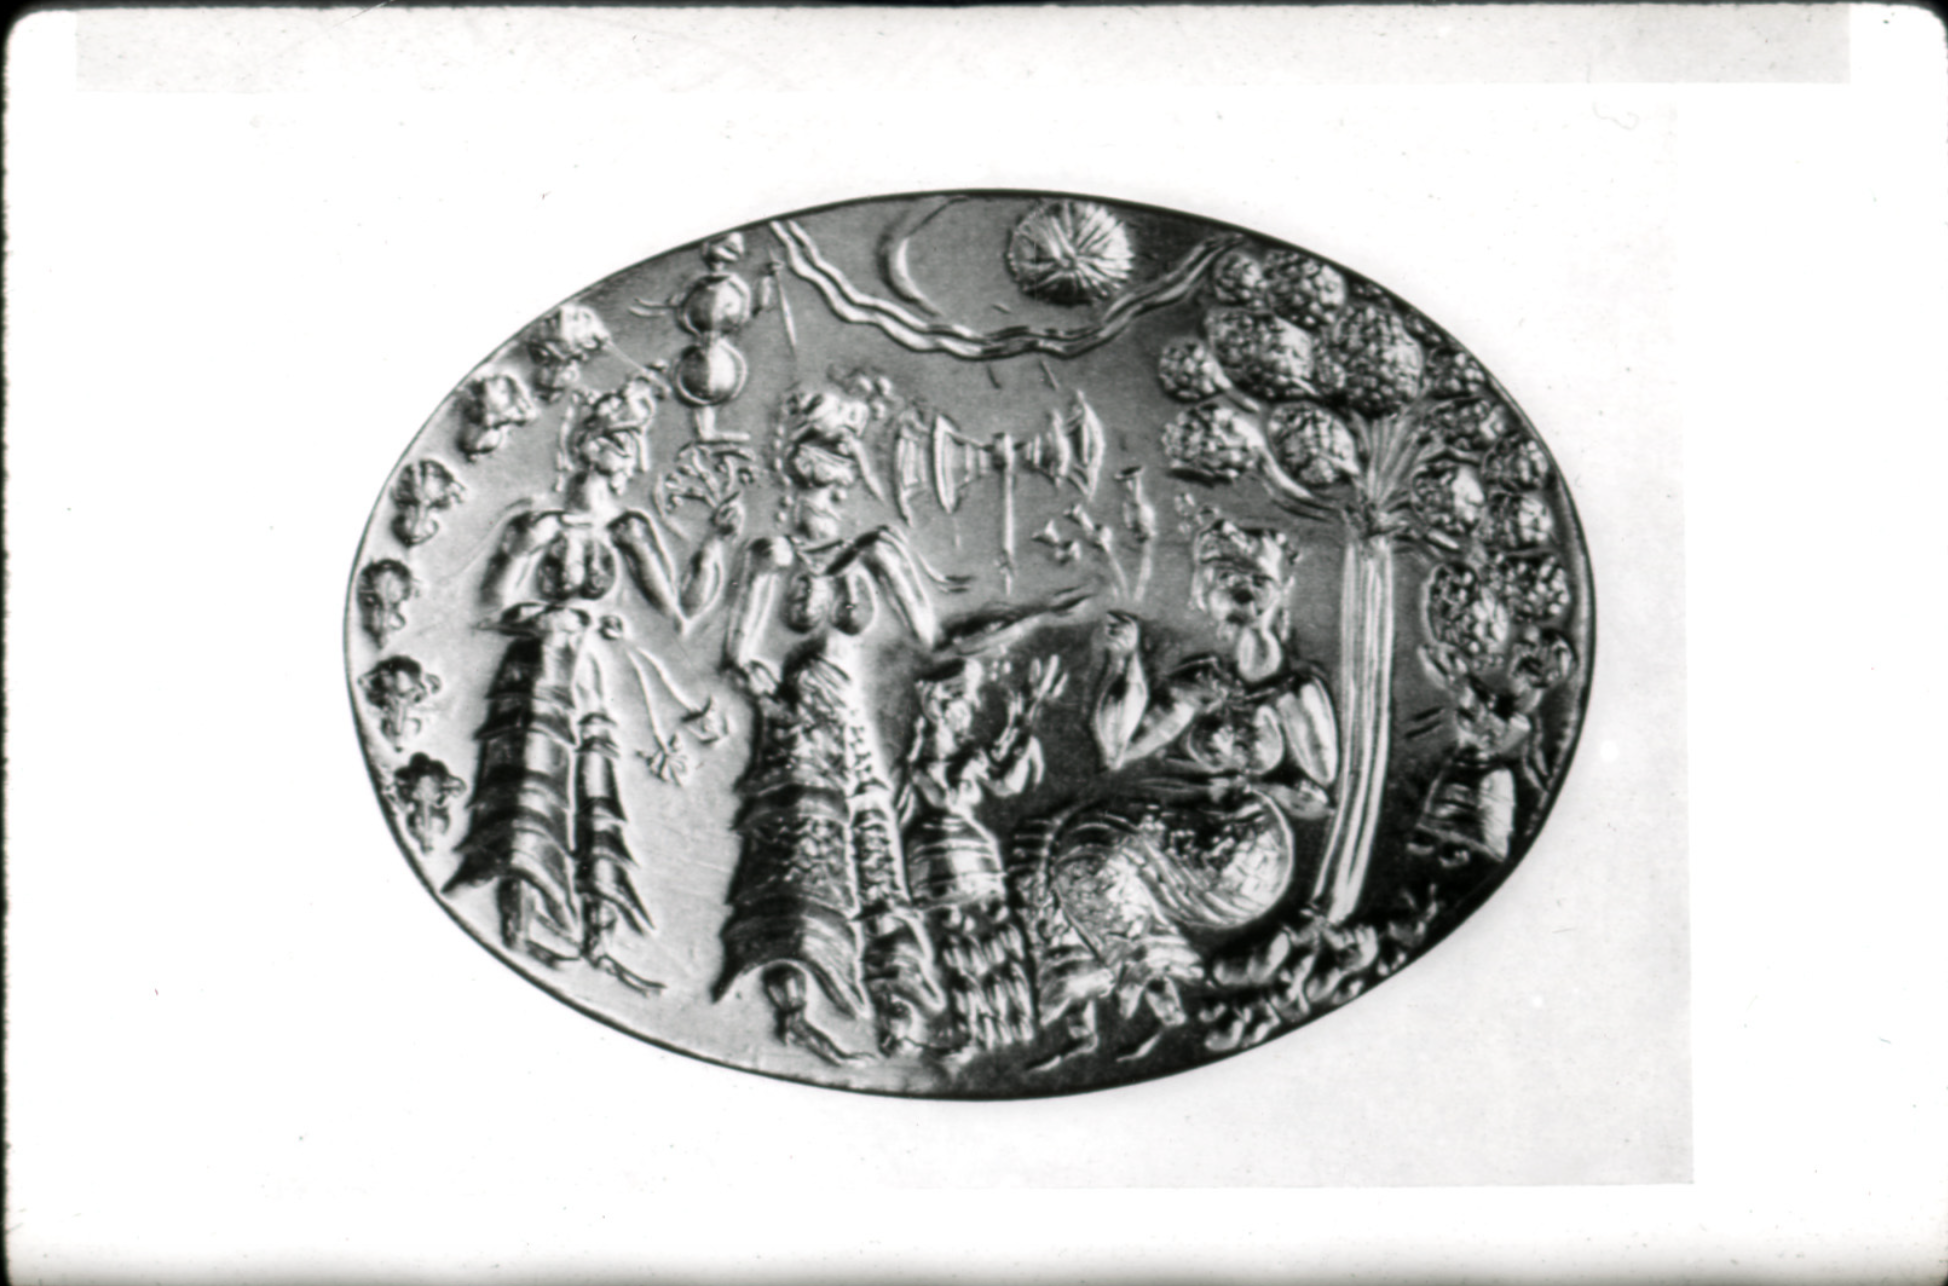 This piece is from a Minoan seal ring used as a form of signature or identification. There are three women depicted in the seal, the two on the left are standing while the other woman on the right is seated. There is also a tree to the right of the third woman as well as floating objects, or decoration, around the seal as well. The women in the seal are Minoan based on what they are wearing but could also possibly be divine women since the Minoans tend to worship multiple goddesses. Although it is not typical for a woman to be wearing a seal ring, it still falls under the category of jewelry. Minoan women are depicted wearing lots of jewelry in paintings and mosaics, so they would be able to appreciate the art on their jewelry since they interact with it in their lives.  